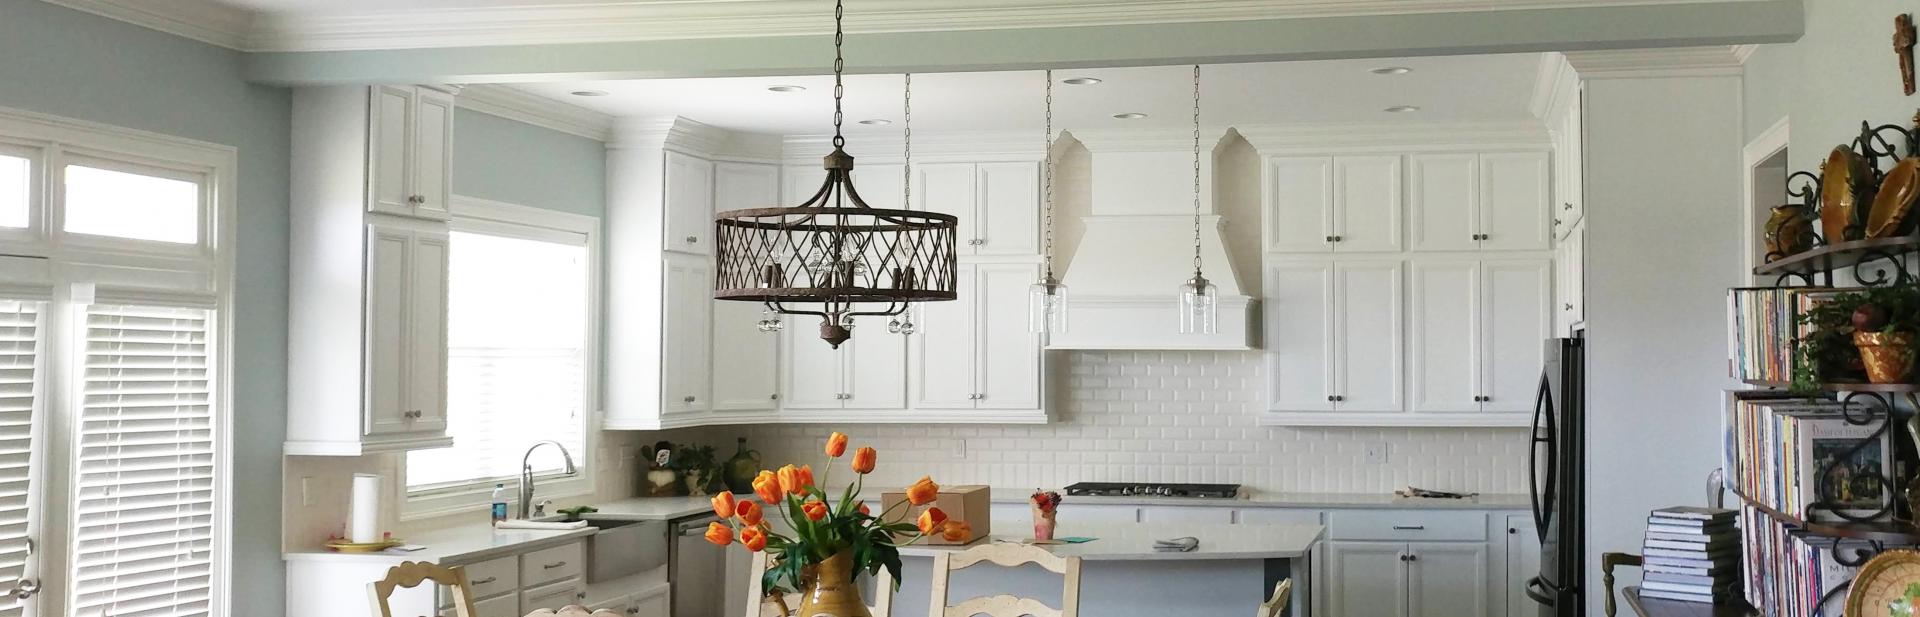 Before - French Country Kitchen design